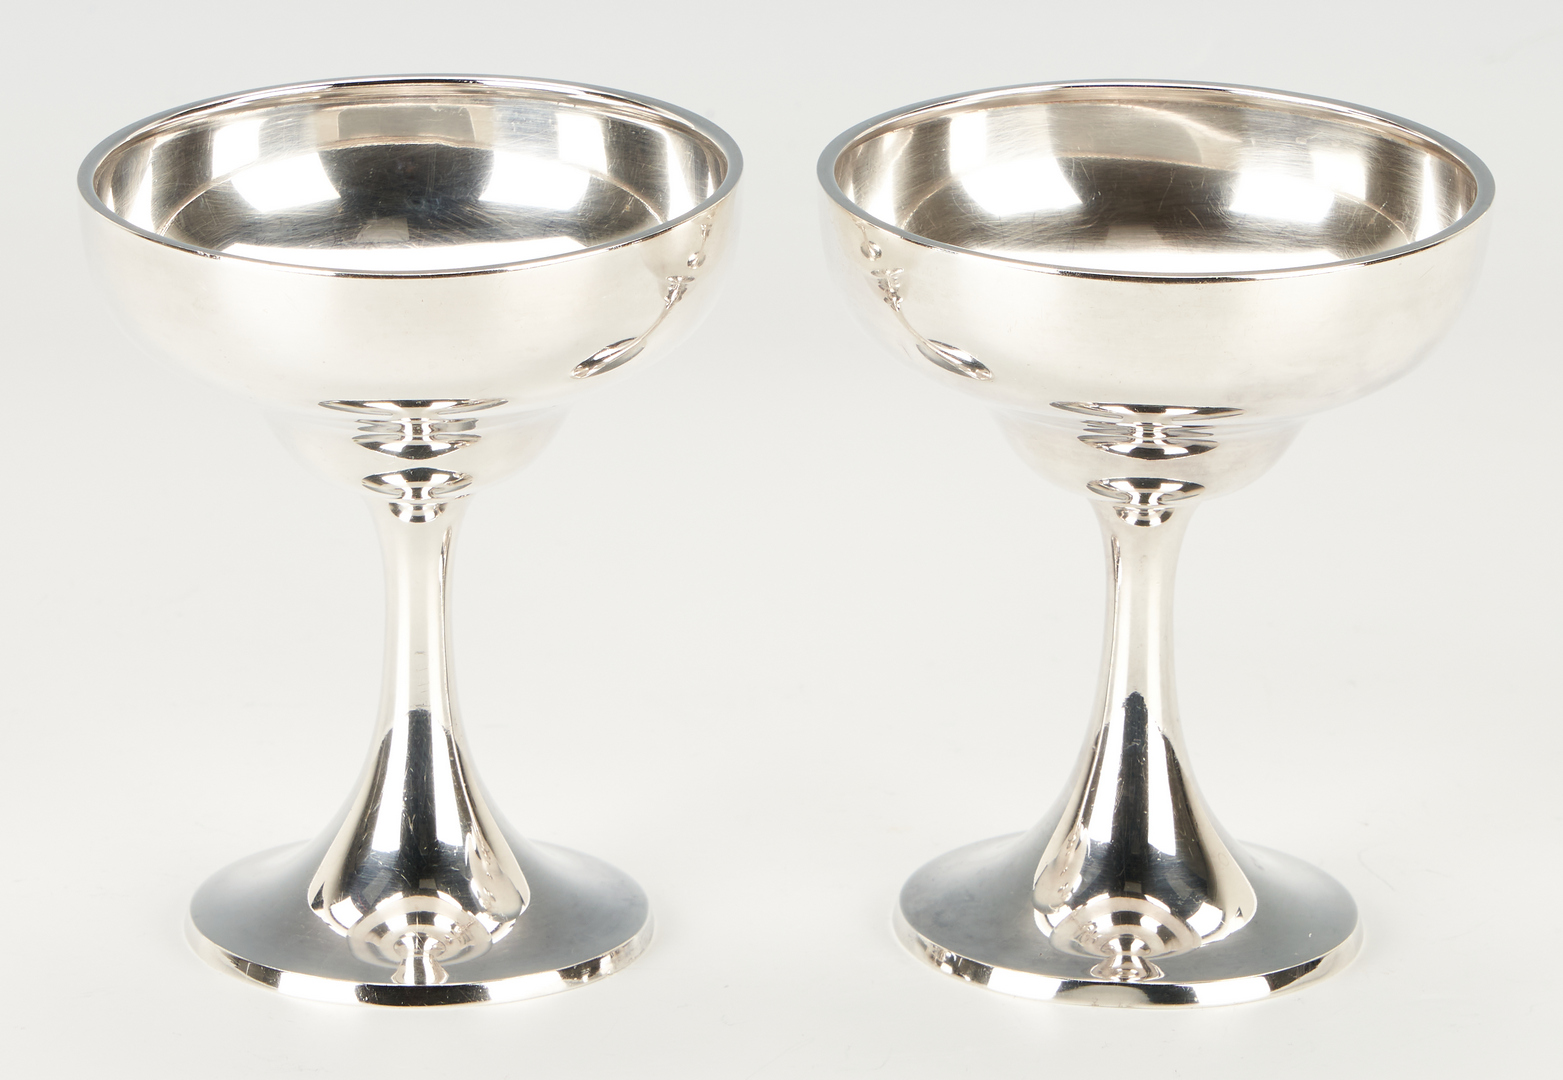 Lot 429: 12 Wallace Sterling Silver Sherbets